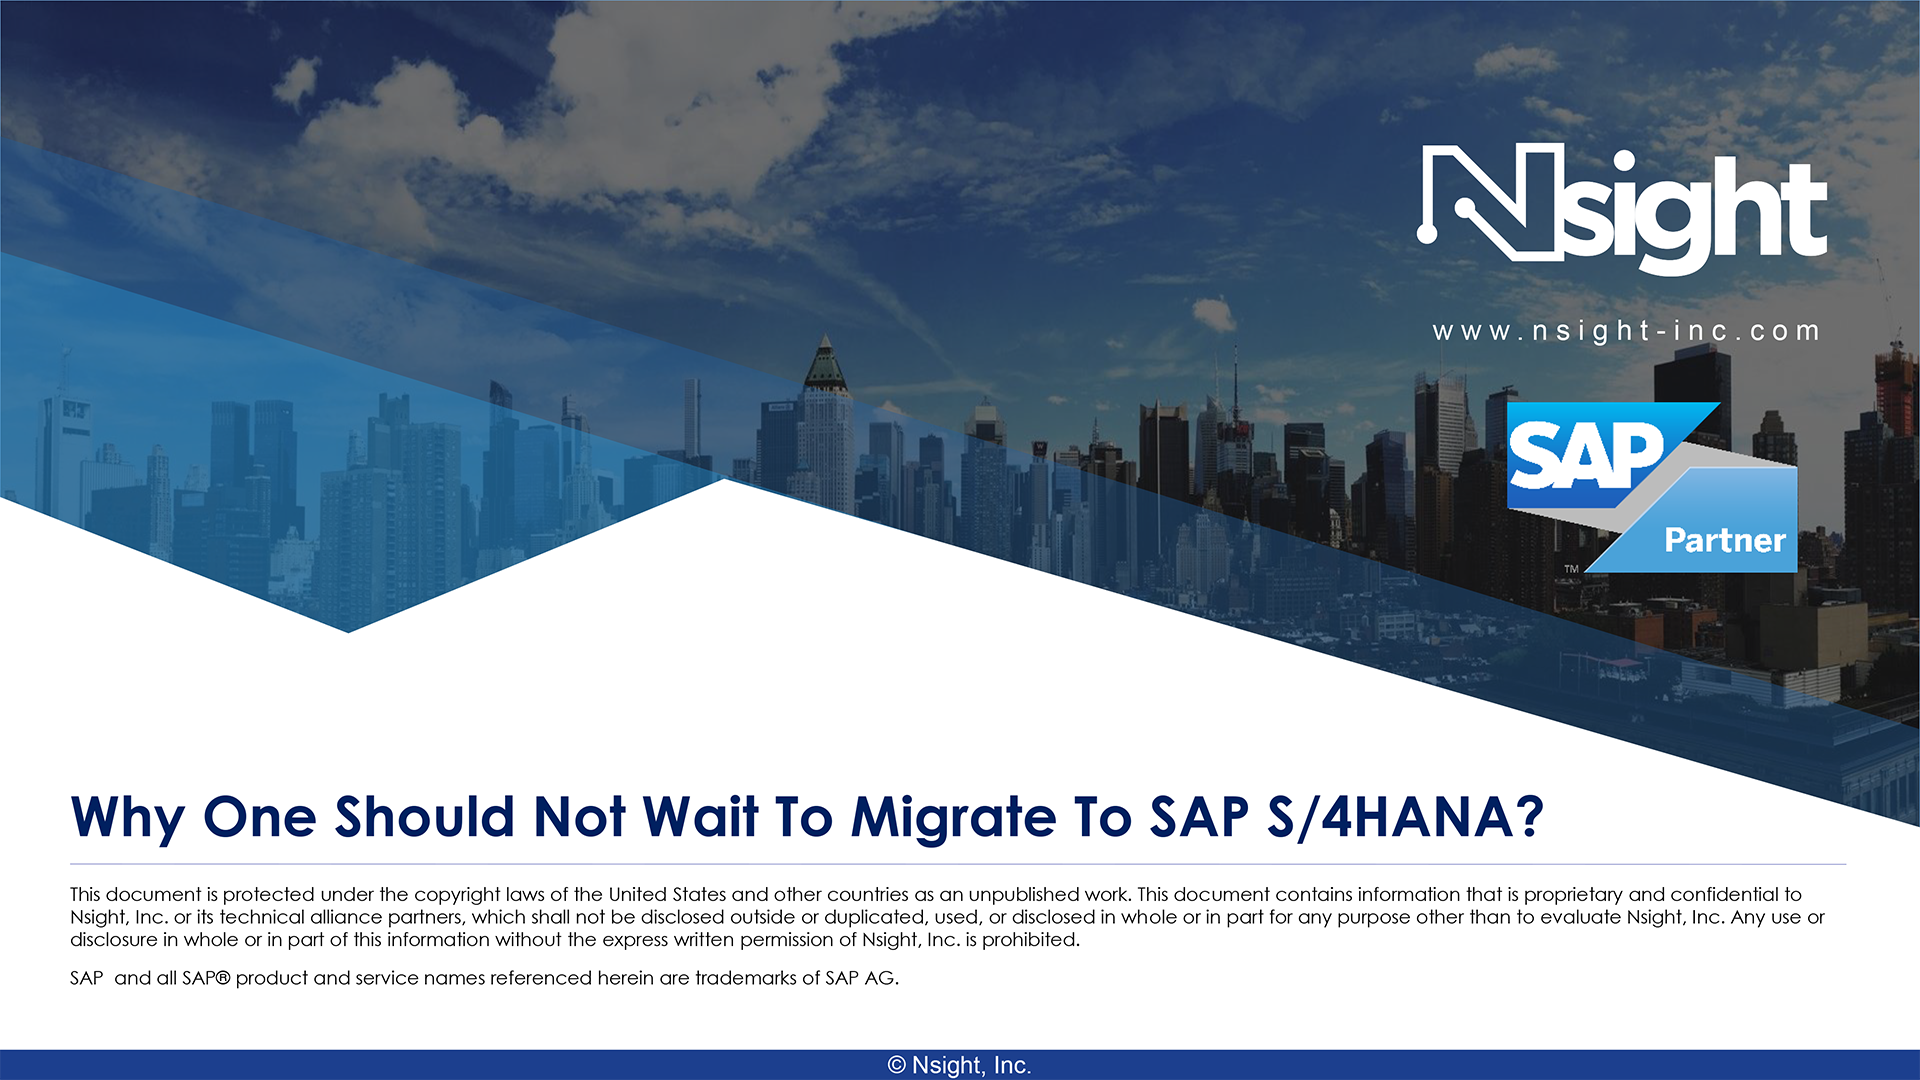 Why should one not wait to migrate to SAP S/4HANA?